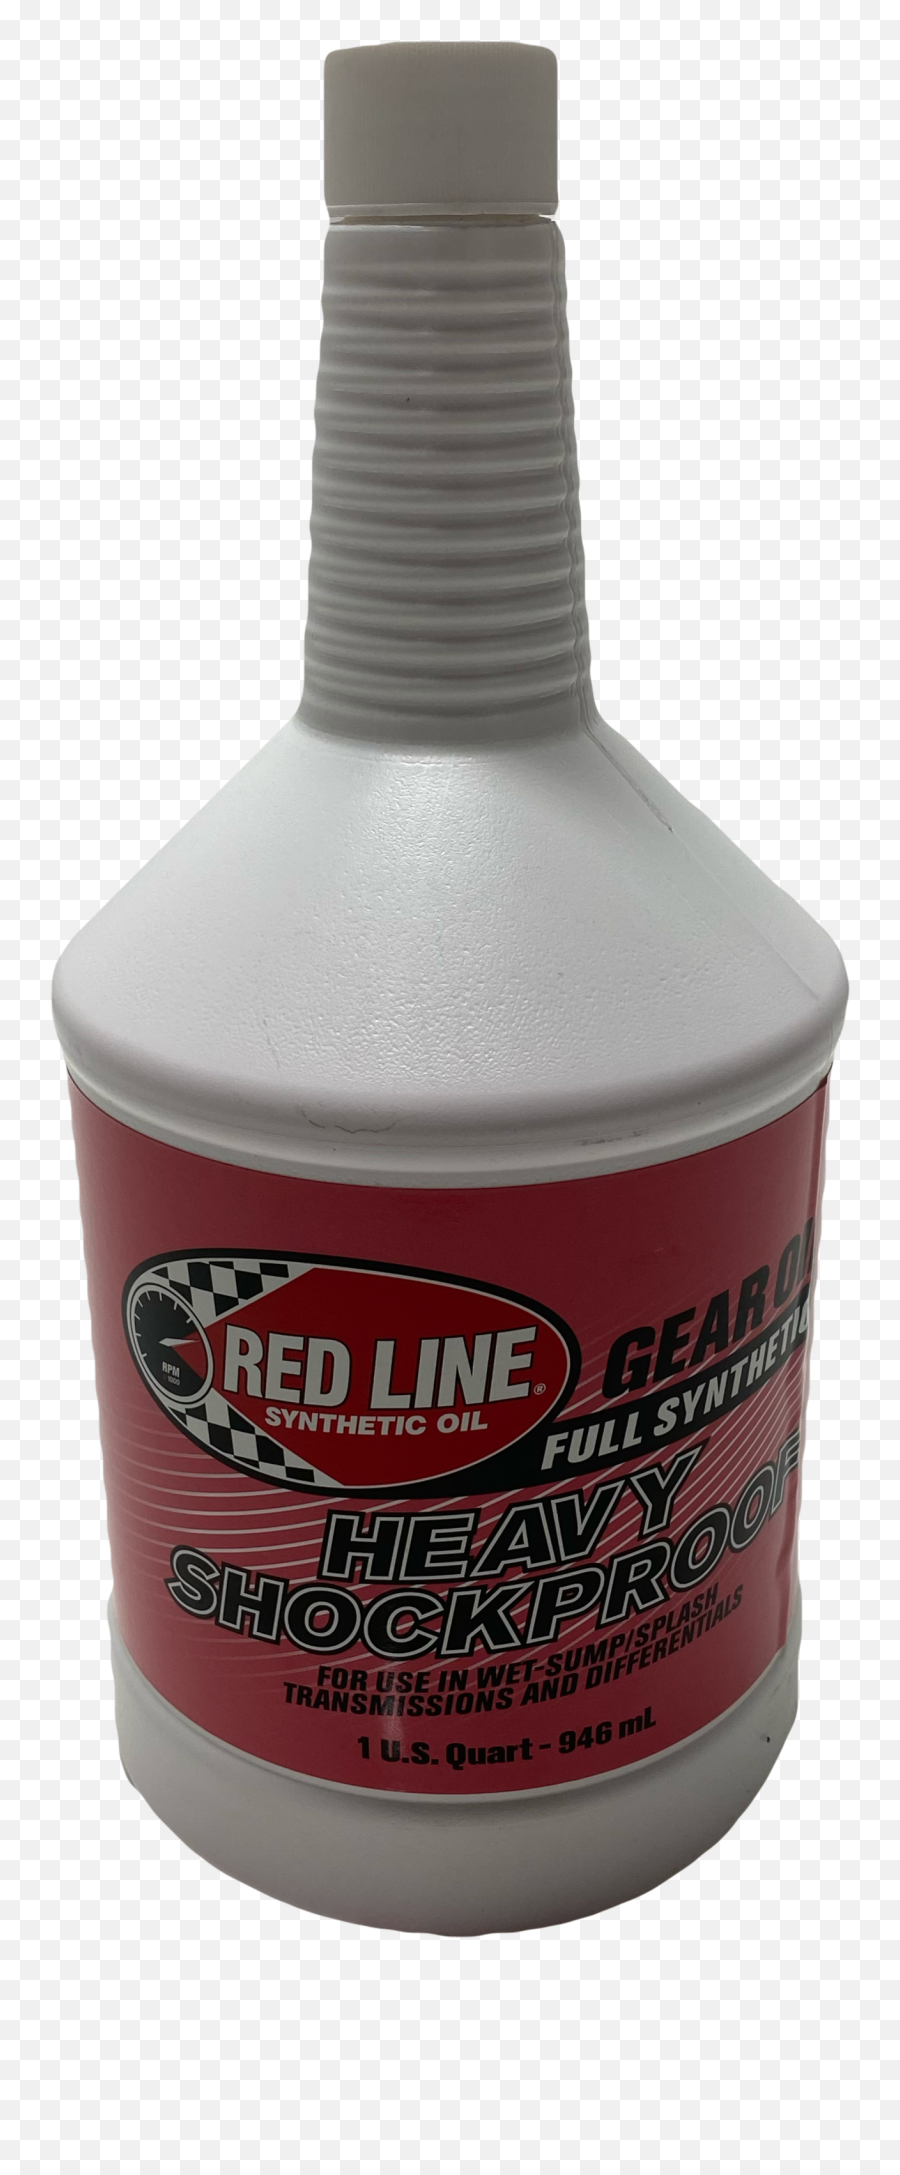 58204 - Red Line Shock Proof Gear Oil 75w90 Emoji,Red Particles Png